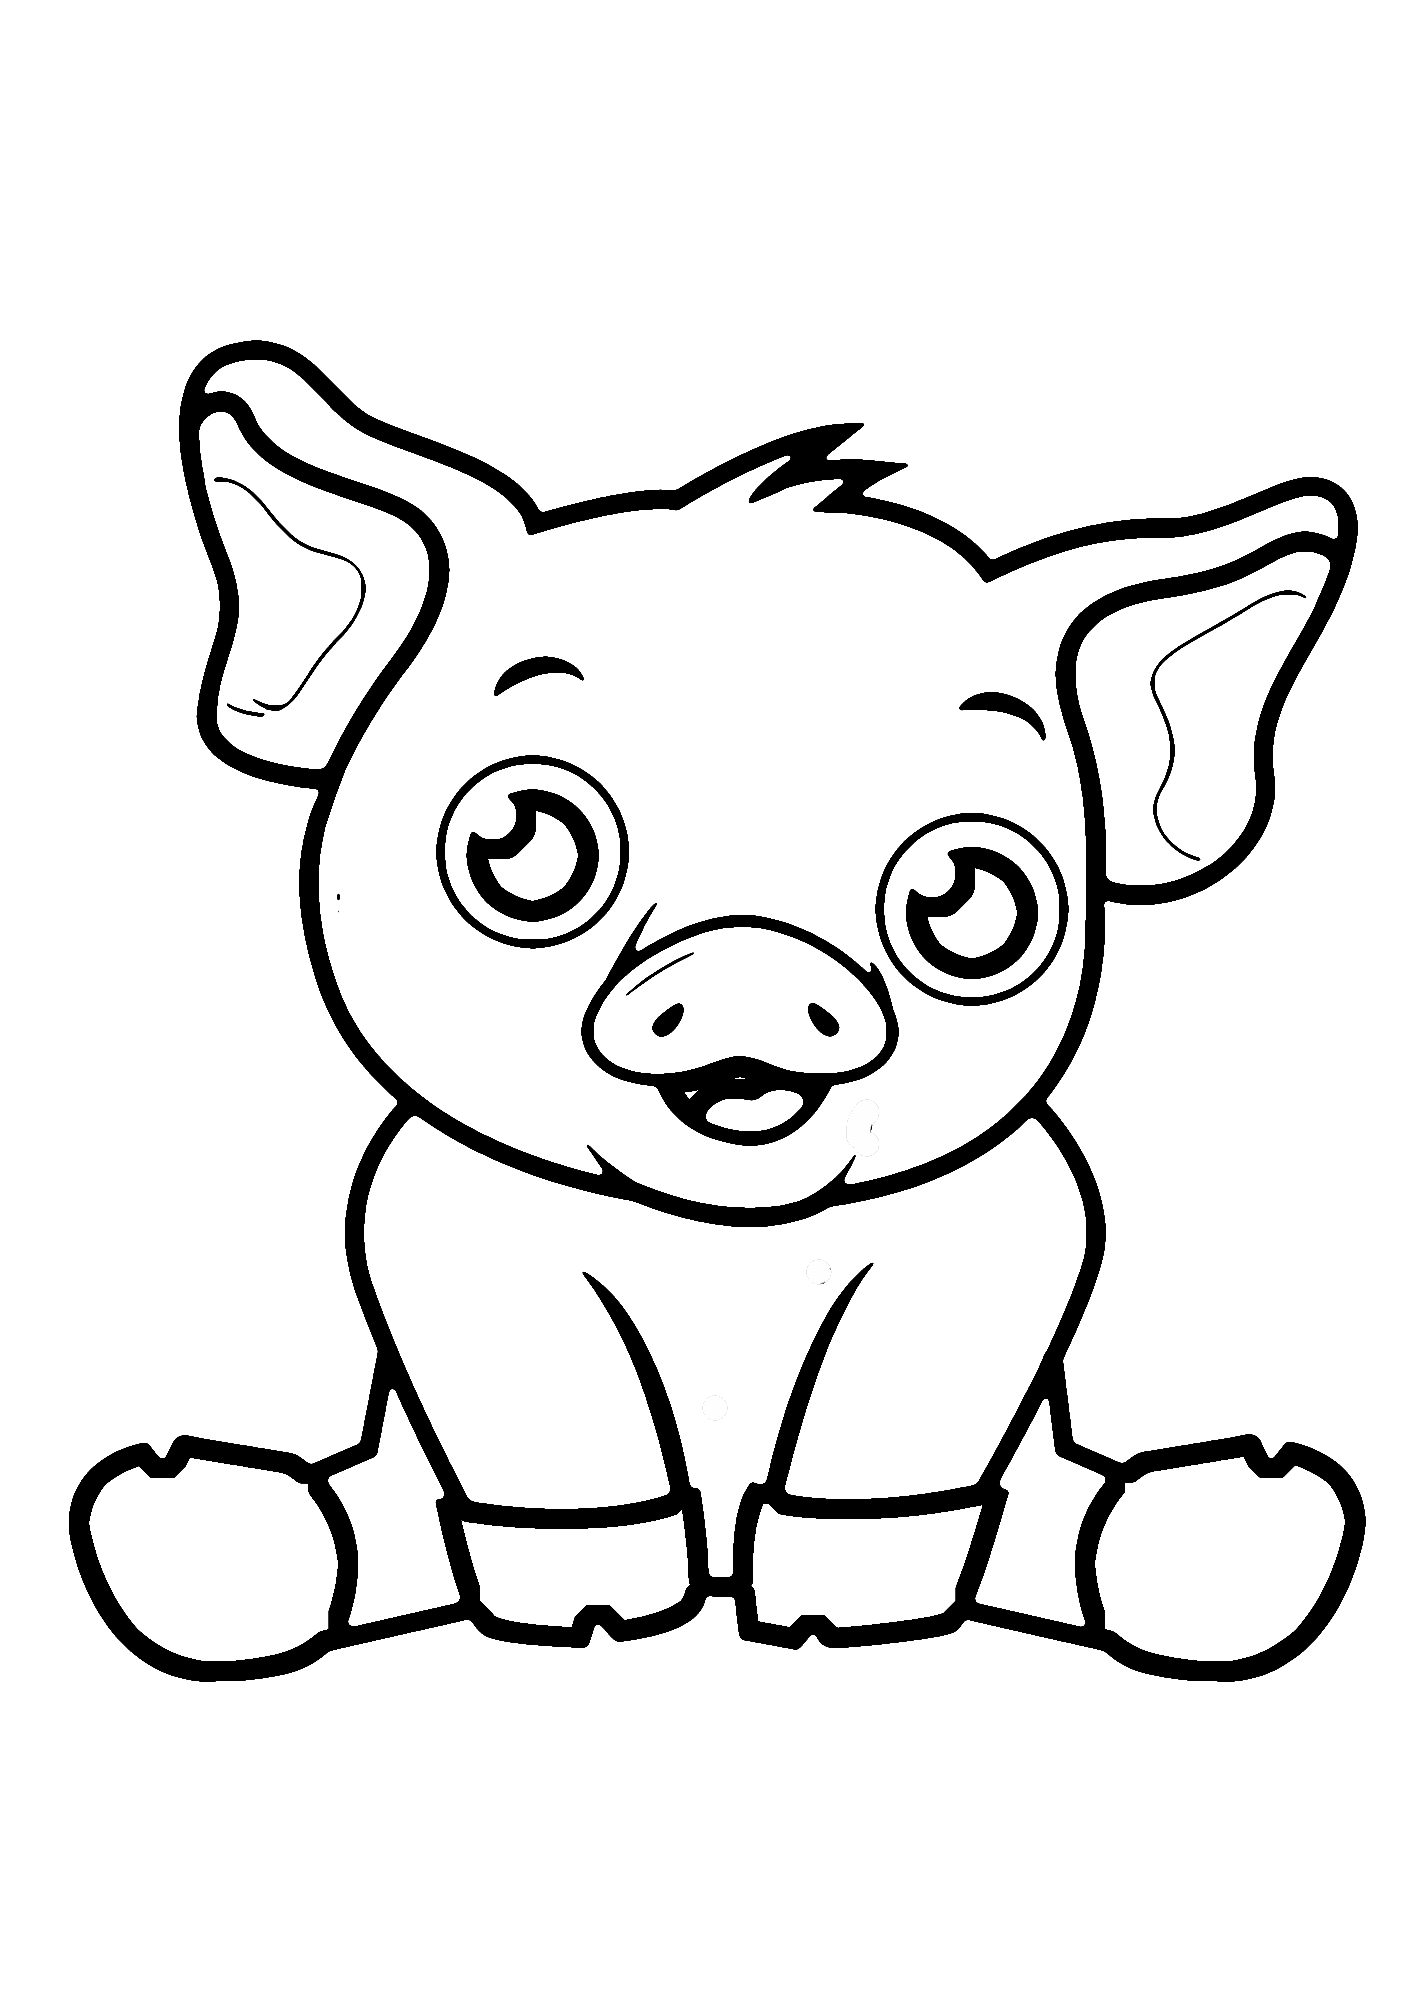 Free Pig Coloring Page